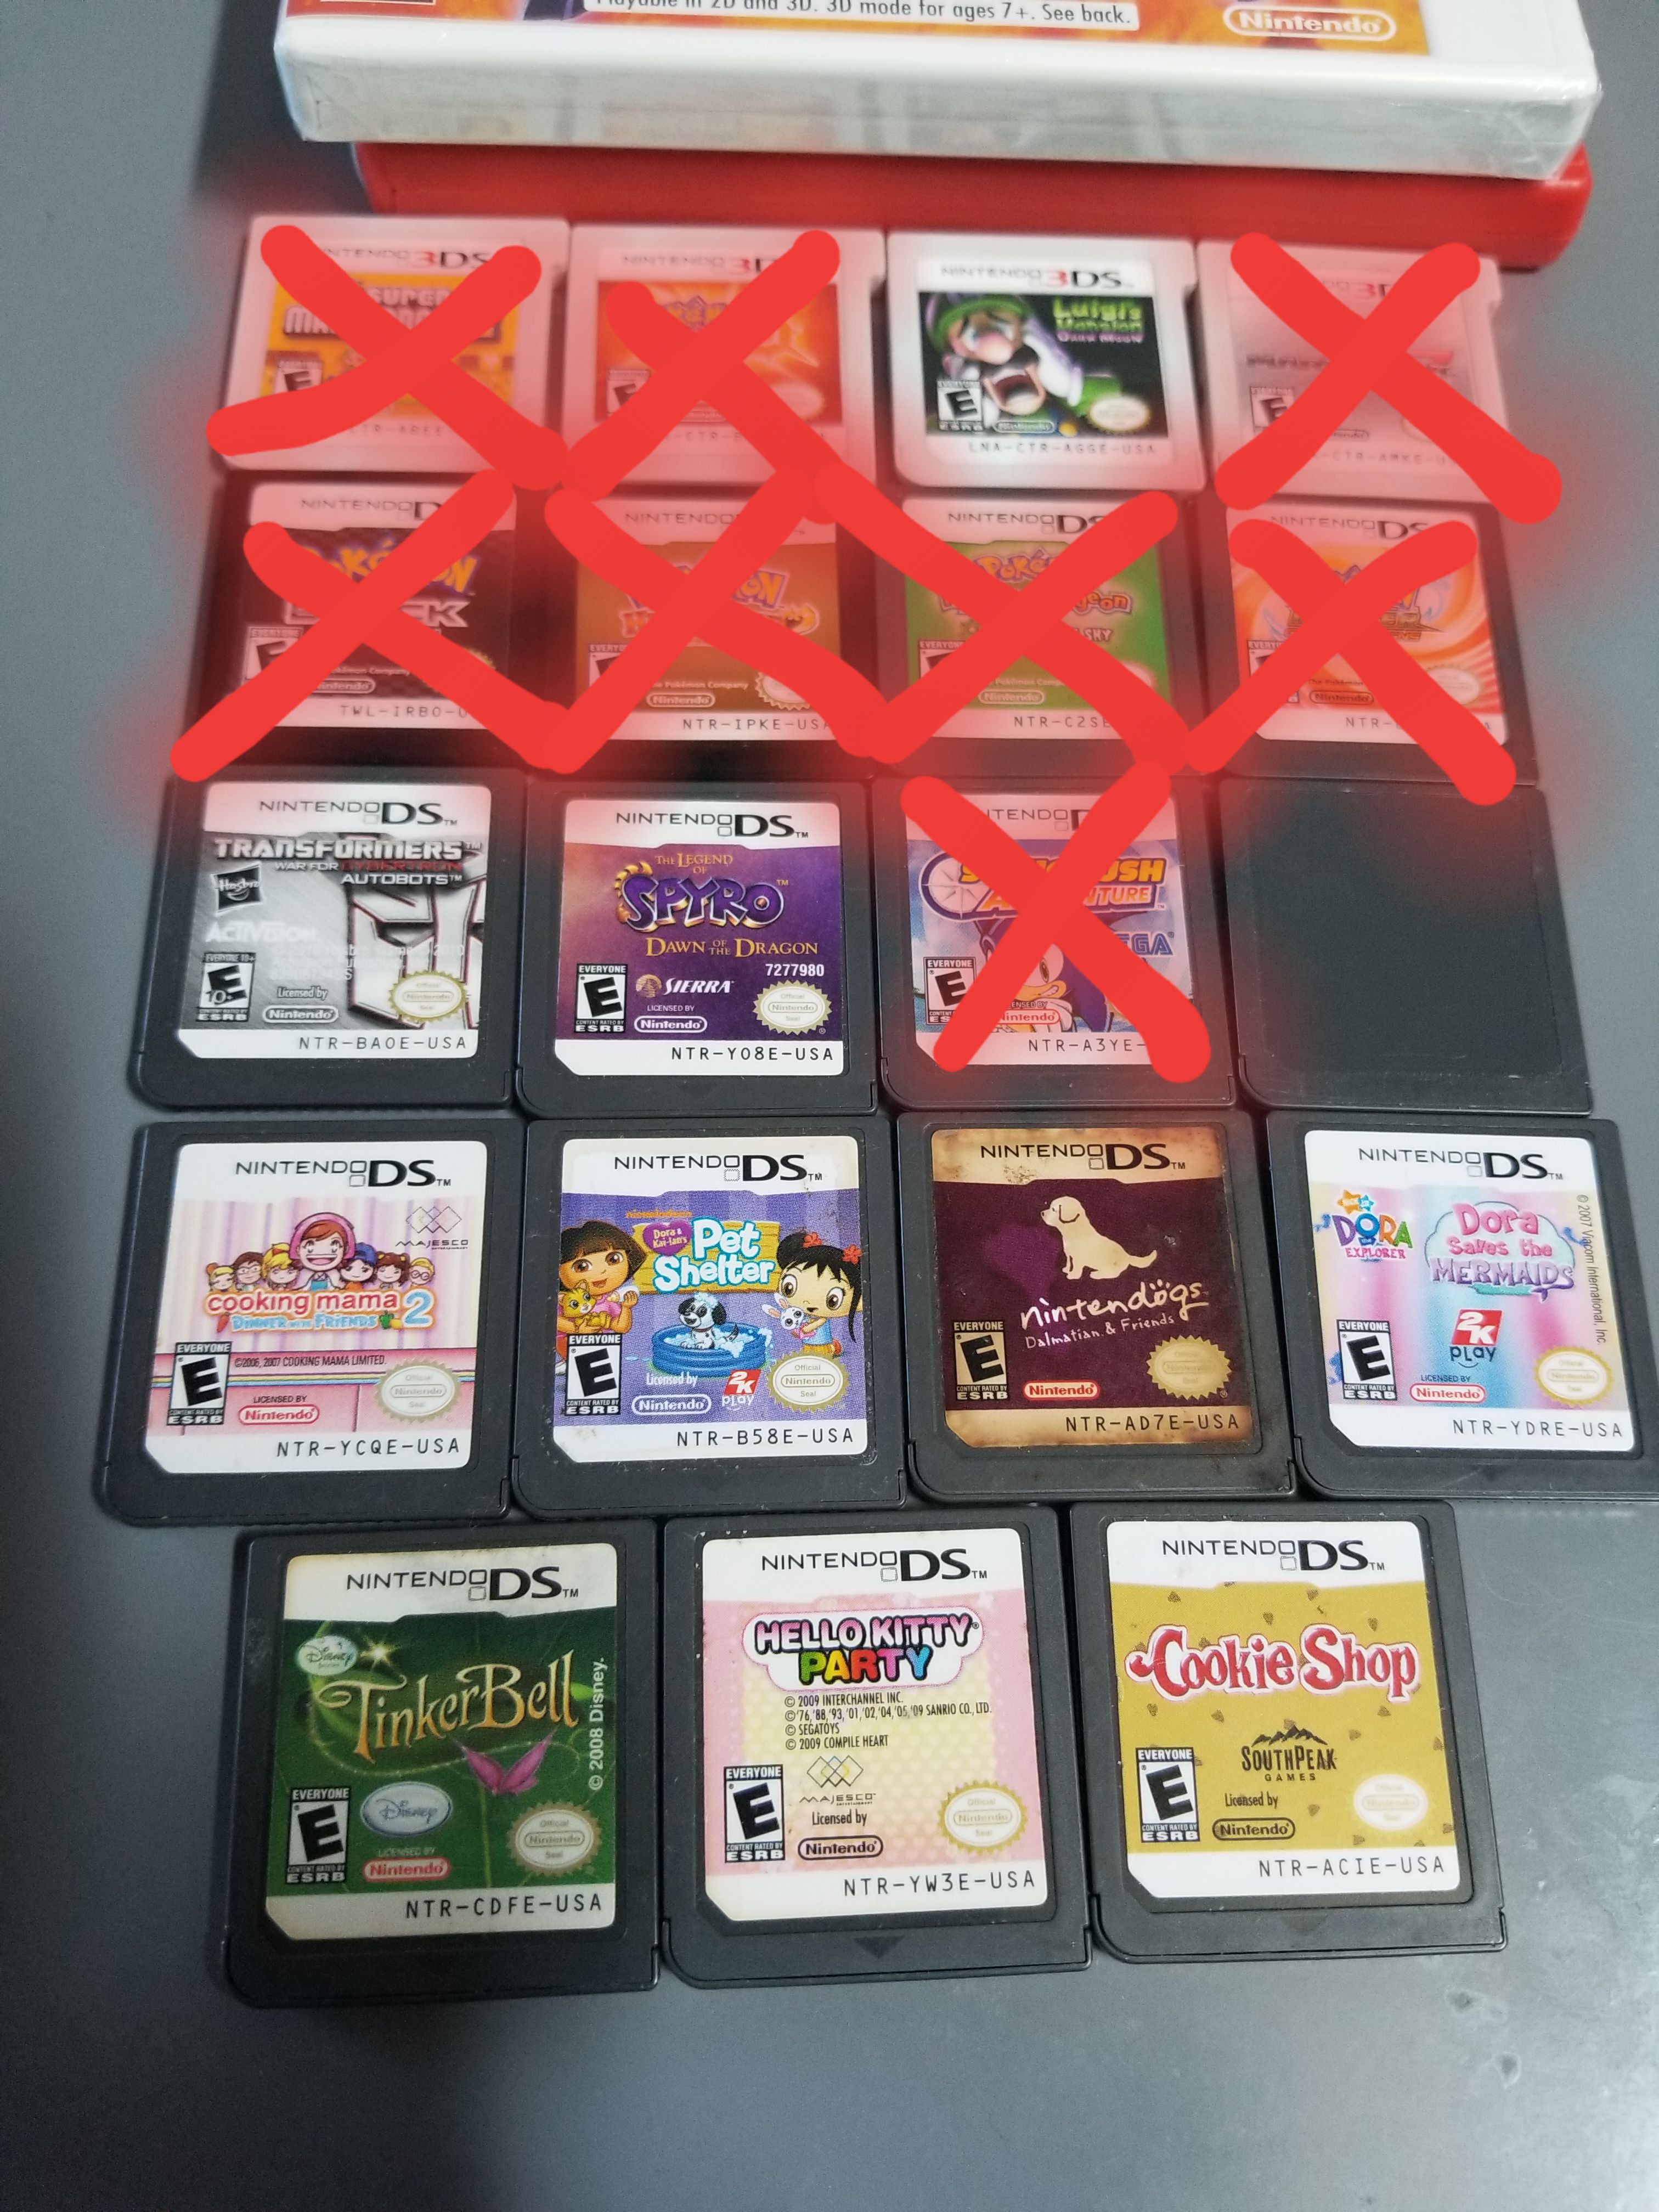 11 3ds and ds games.